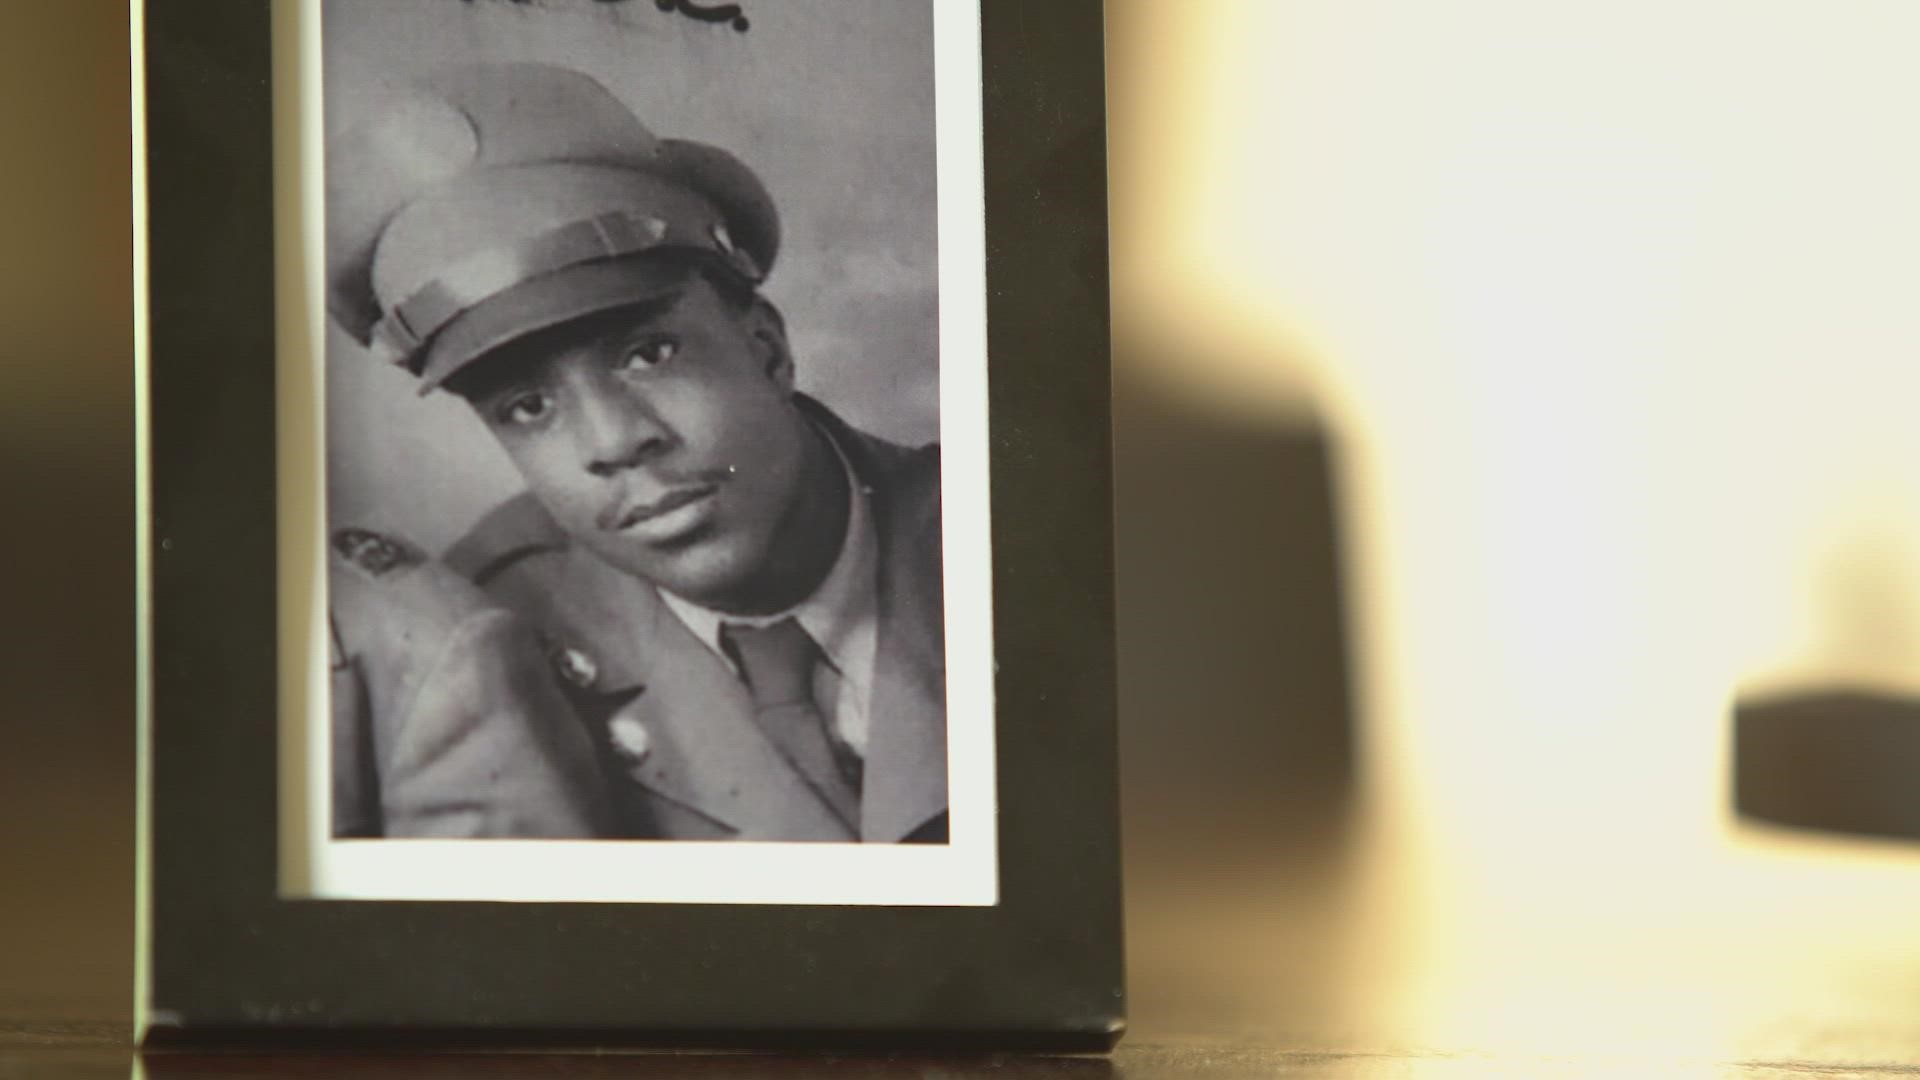 R.B. Cherry was only 19 when he disappeared during the Korean War. Now, with the mystery finally solved, his family finally gets a chance to say goodbye on Friday.